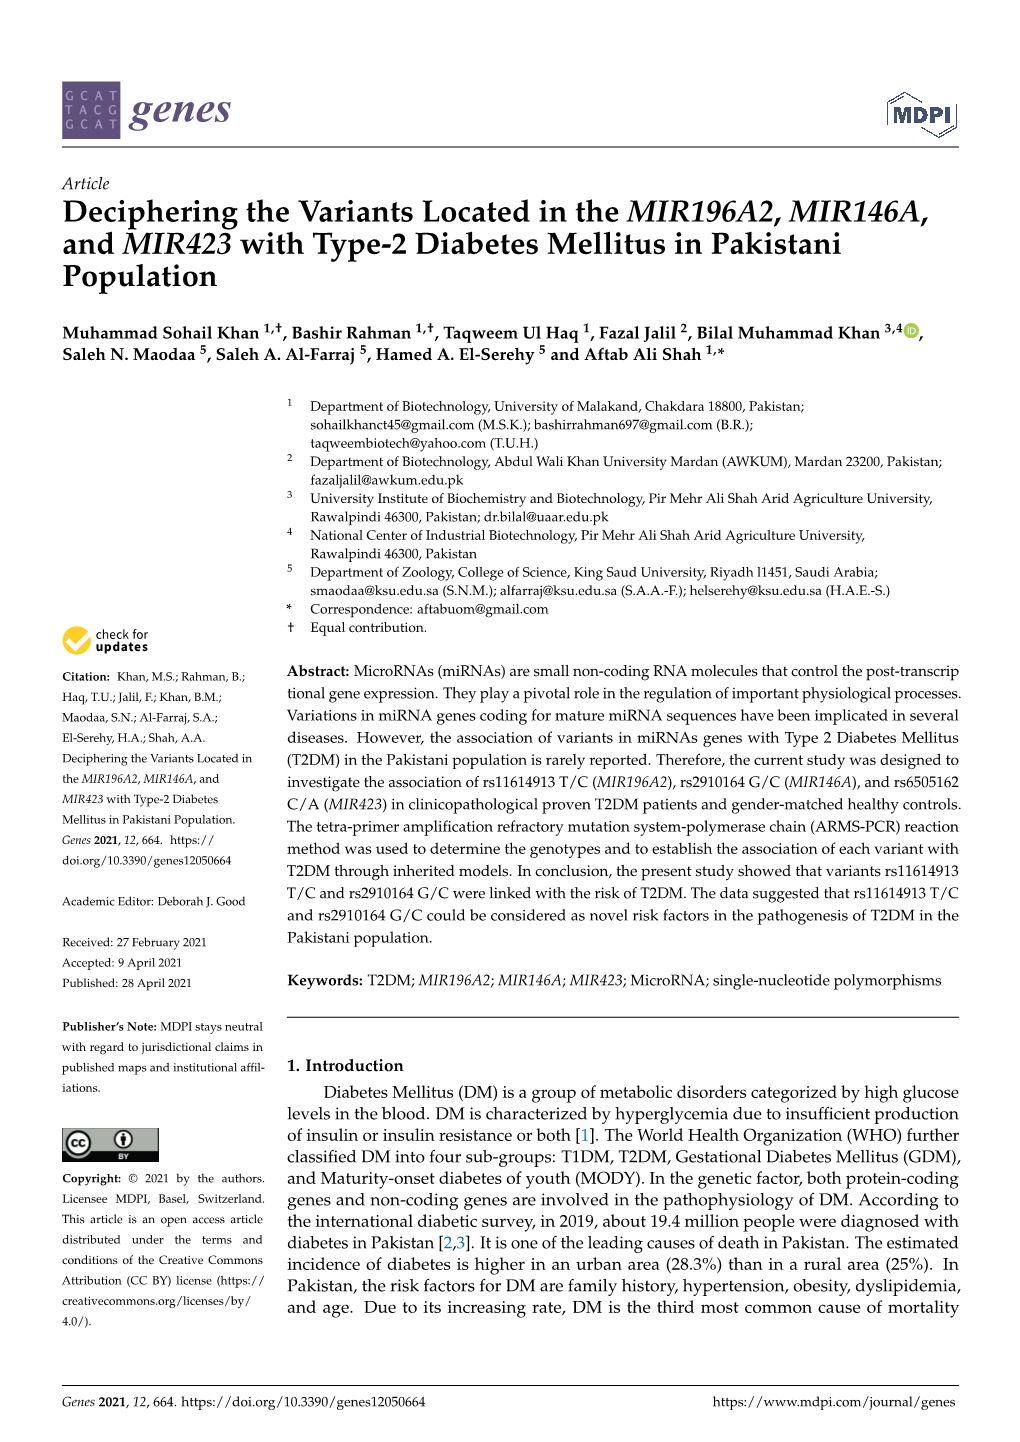 Deciphering the Variants Located in the MIR196A2, MIR146A, and MIR423 with Type-2 Diabetes Mellitus in Pakistani Population